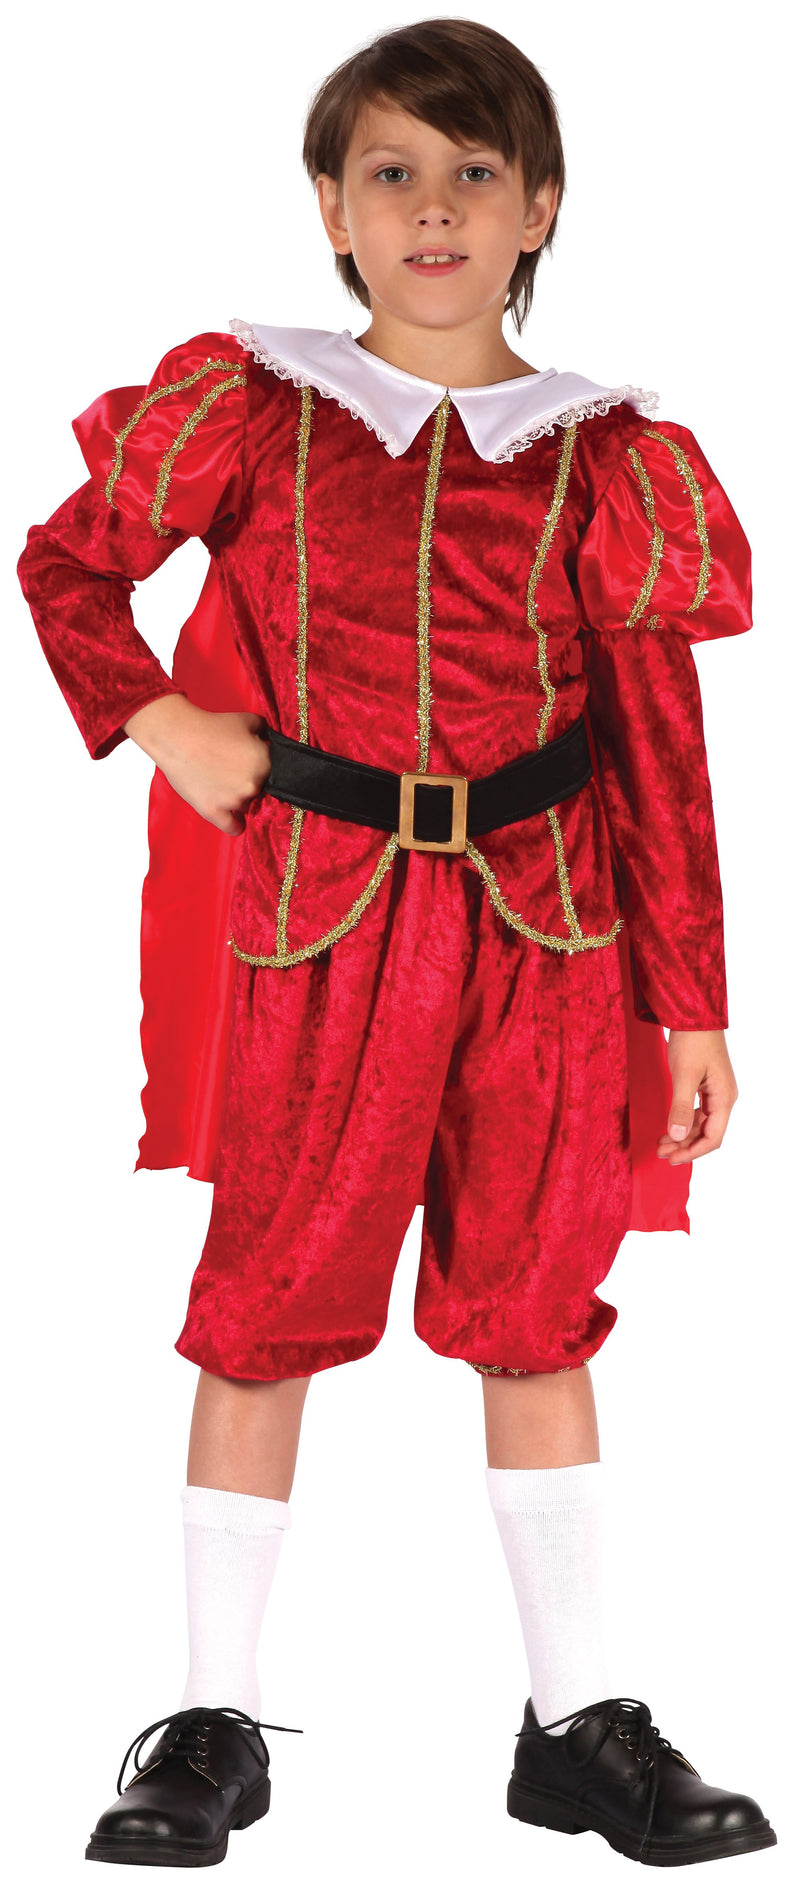 Tudor Prince S Childrens Costumes Male To Fit Child Of Height 110cm 122cm Boys Bristol Novelty Childrens Costumes 2187